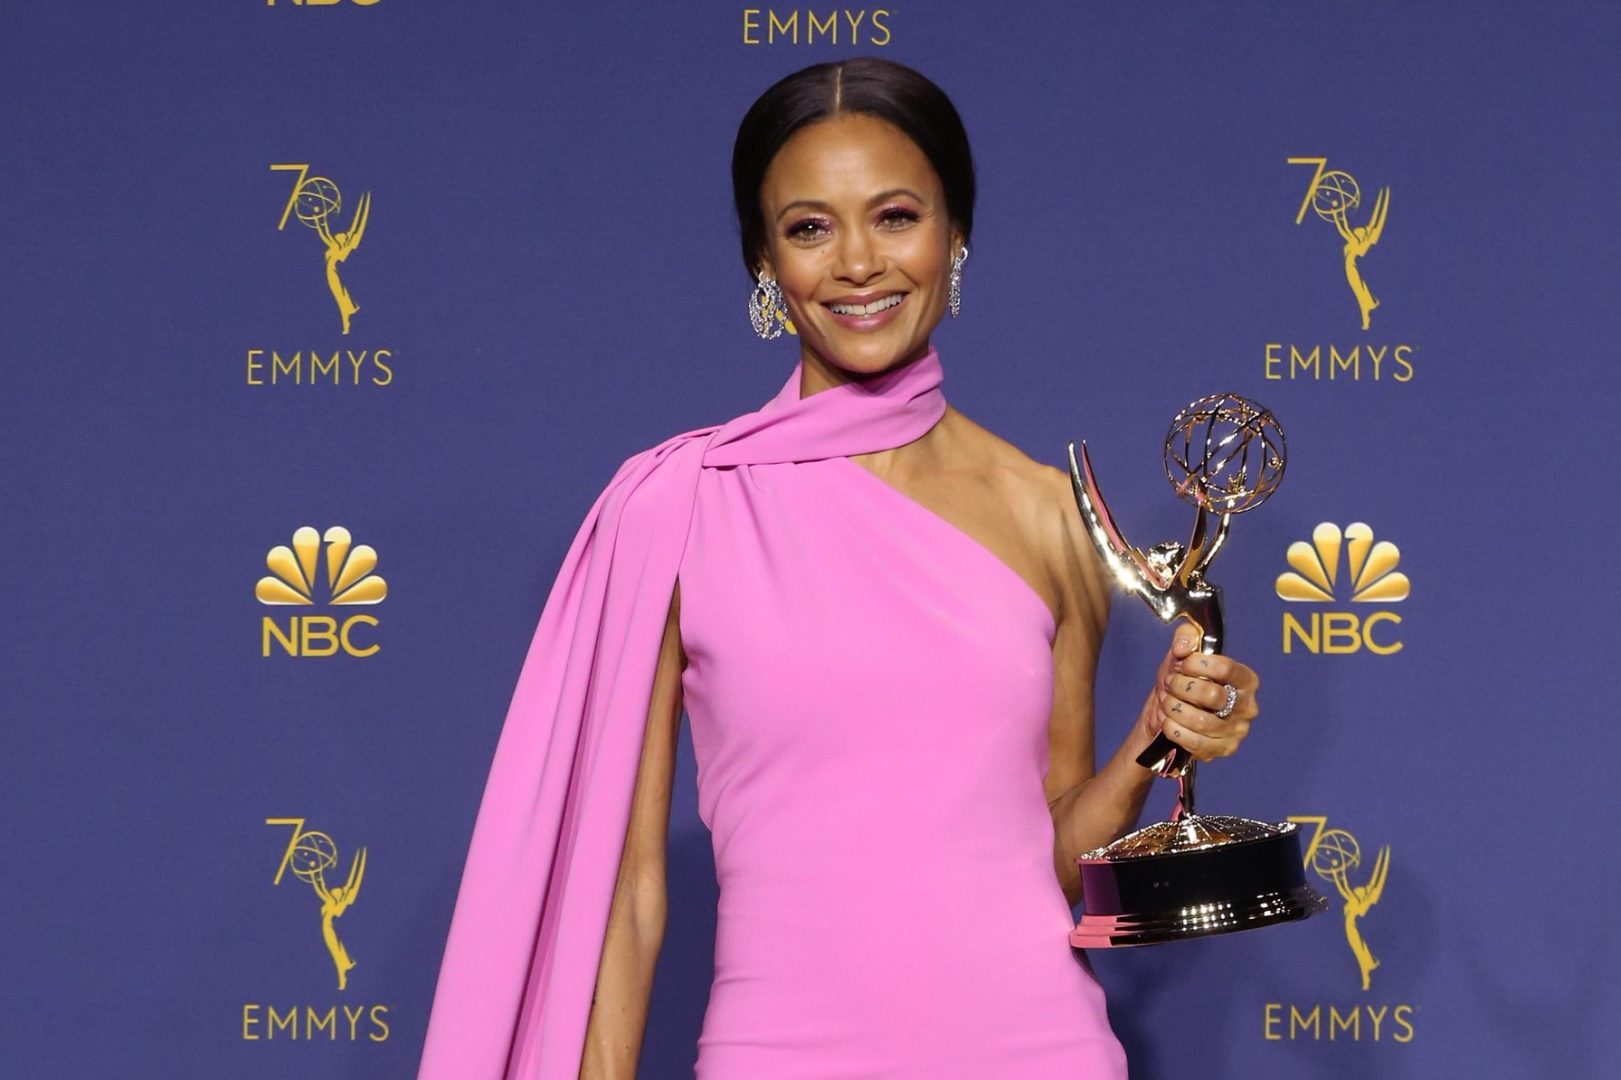 Emmy Awards 2020 nominations announced